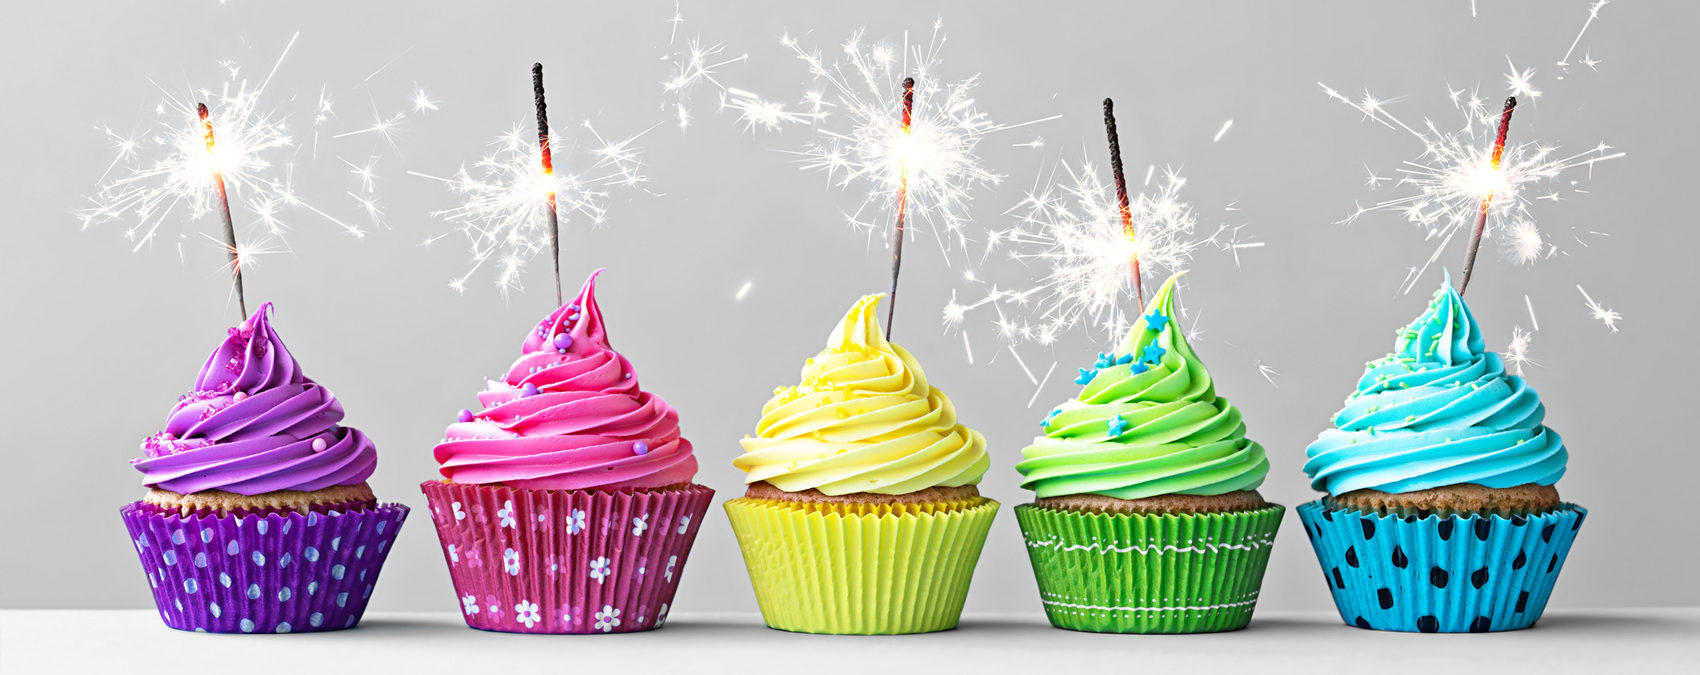 7 BIRTHDAY MARKETING IDEAS FOR BUSINESSES – GET CUSTOMERS IN THE DOOR ON THEIR BIG DAY